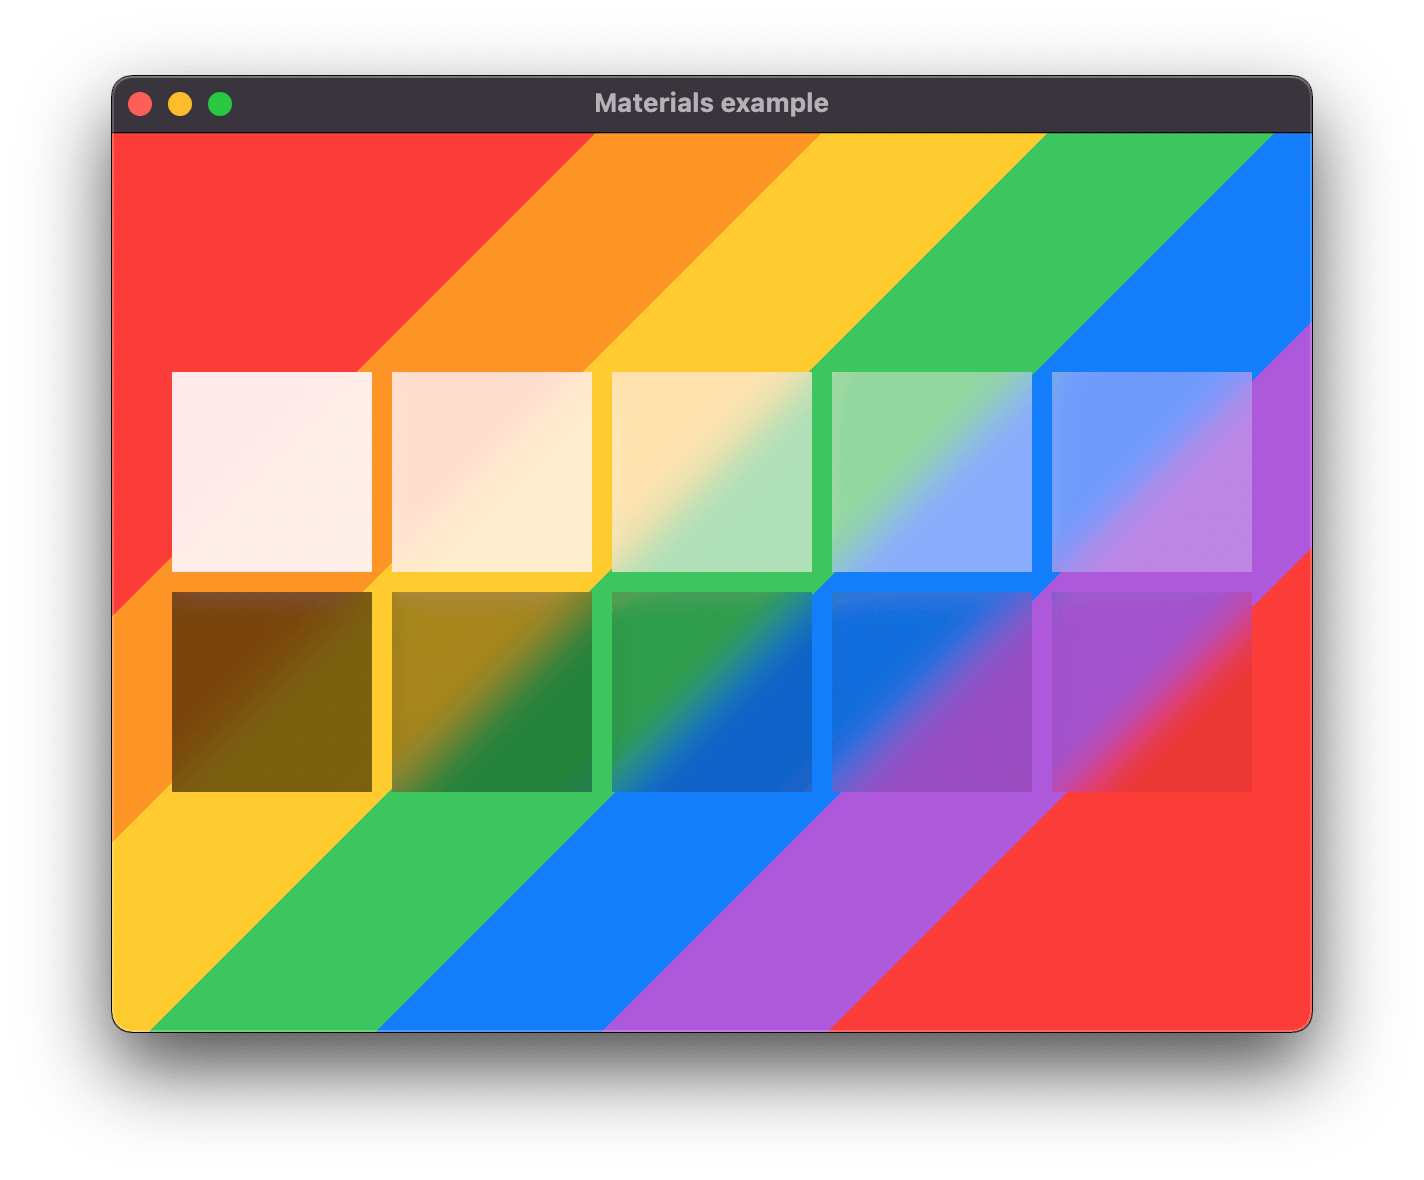 A window that shows different materials applied to rectangles on colored backgrounds